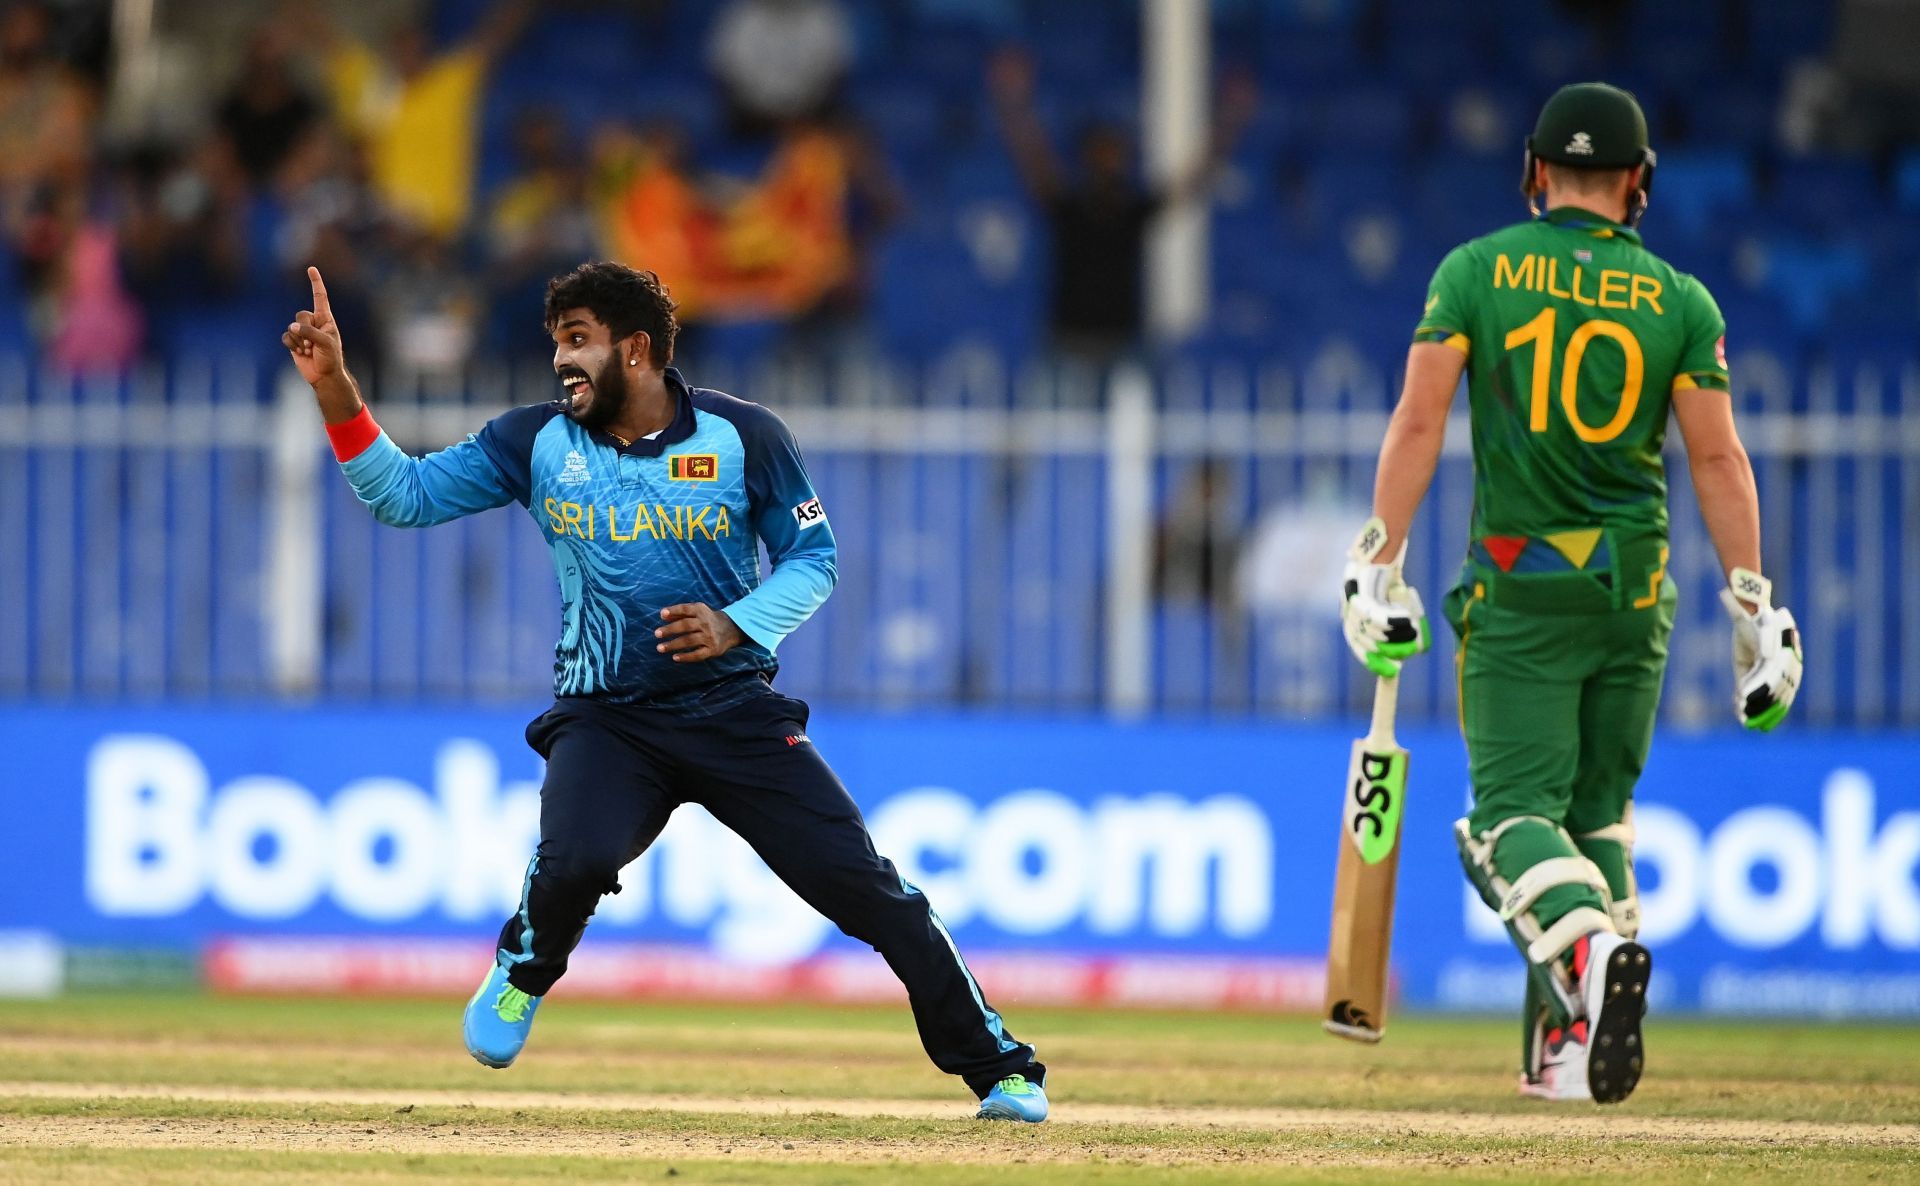 Wanindu Hasaranga was of the player of the tournament&#039;s at the T20 World Cup 2021